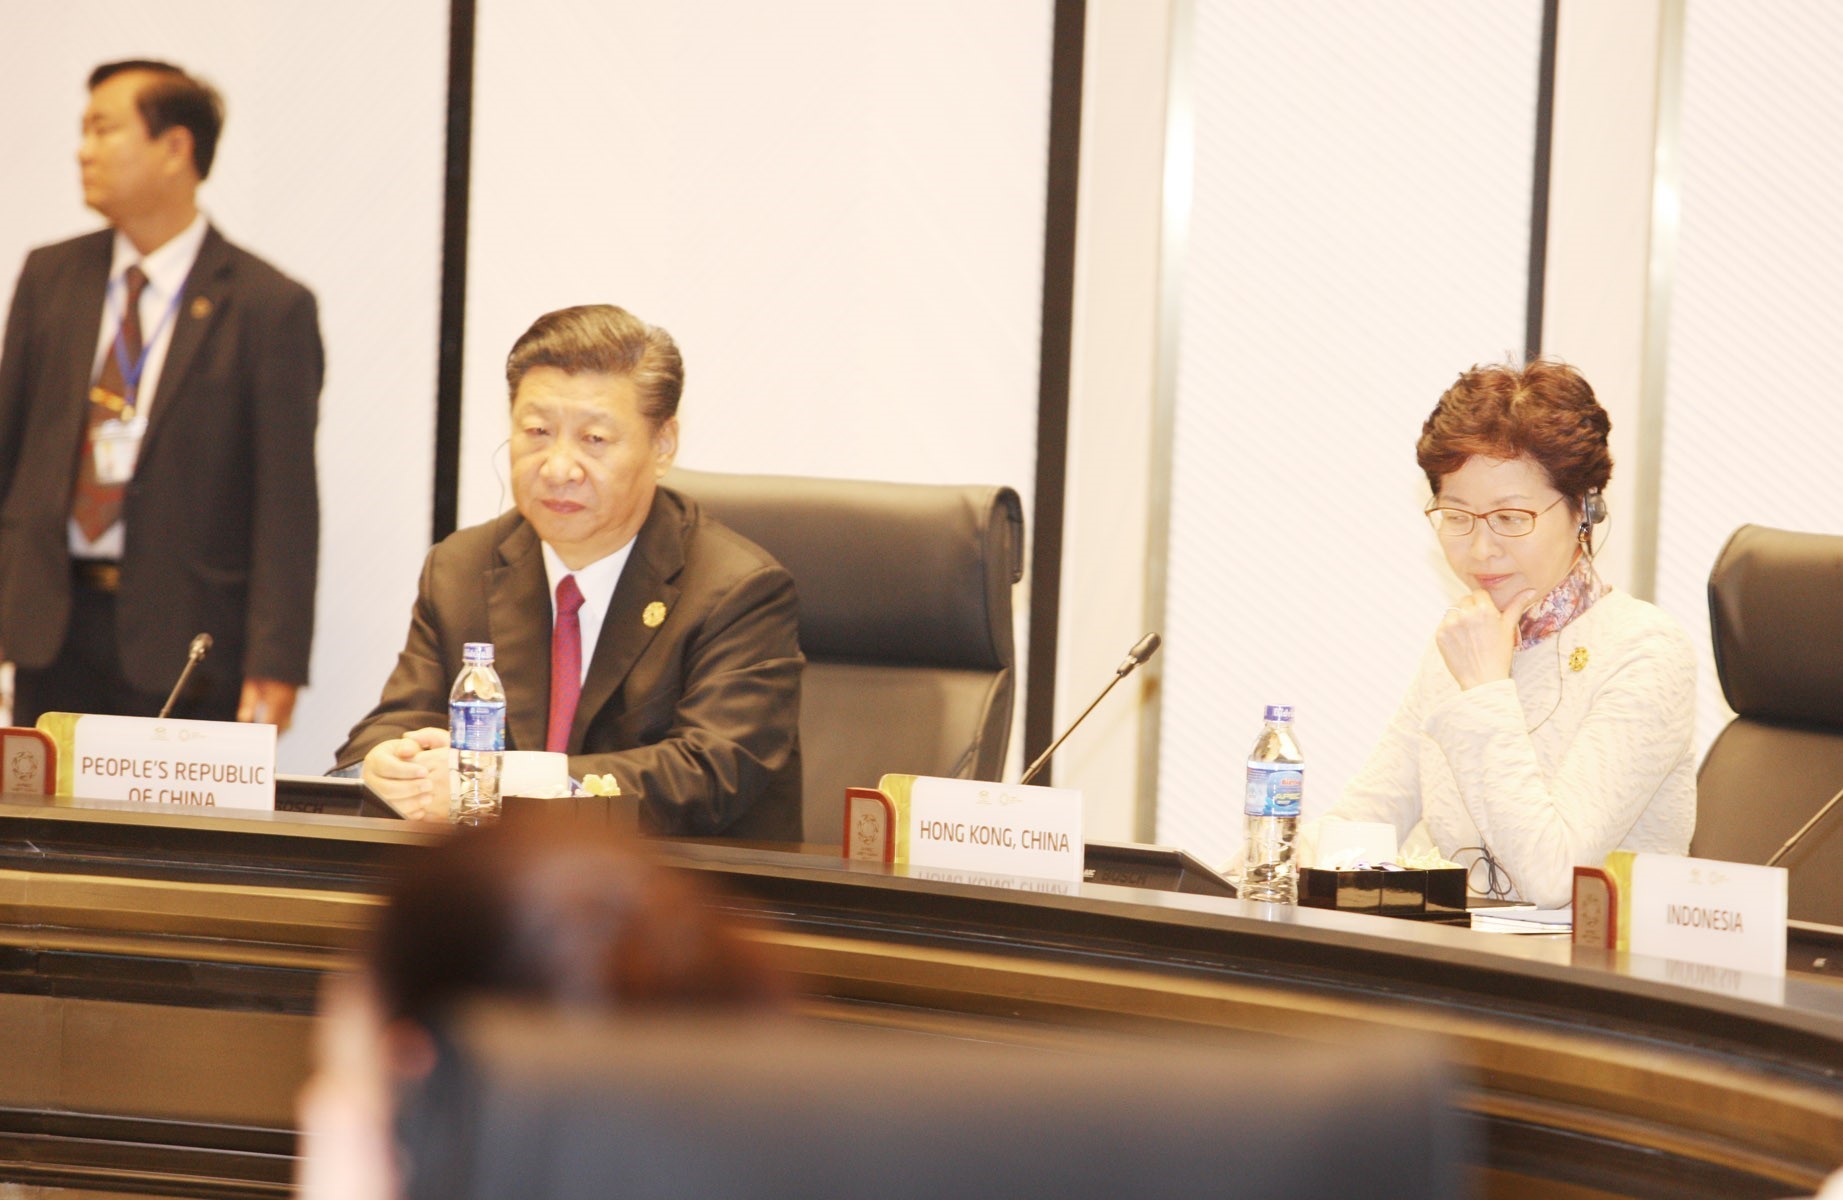 Chinese President Xi Jinping and Chief Executive of China’s Hong Kong Carrie Lam (Photo: Chinhphu.vn)